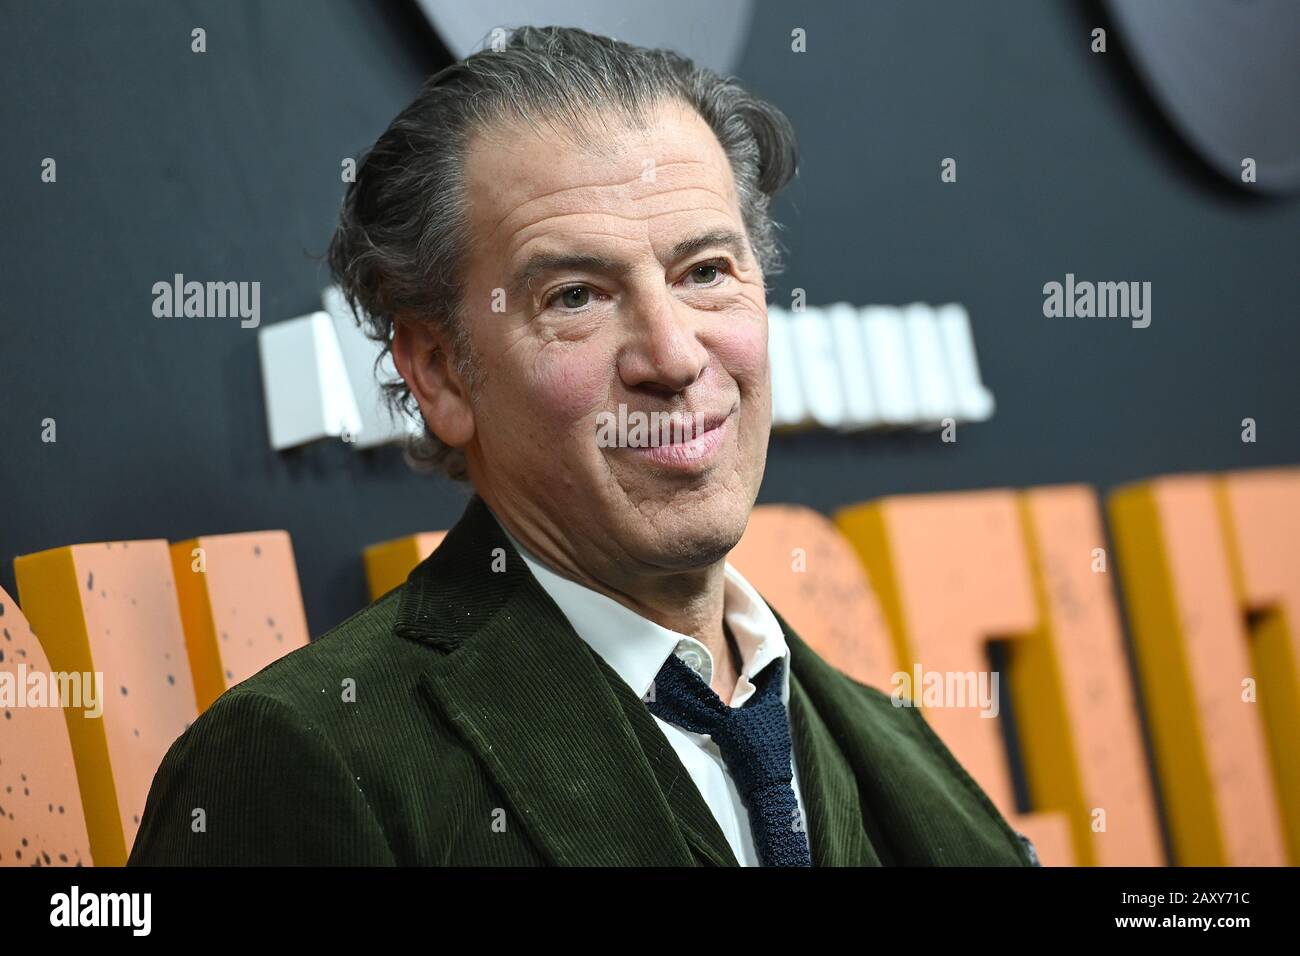 New York, USA. 13th Feb, 2020. EP Scott Rosenberg attends Hulu's New York Premiere of “High Fidelity” at Metrograph in New York, NY, February 13, 2020. (Photo by Anthony Behar/Sipa USA) Credit: Sipa USA/Alamy Live News Stock Photo